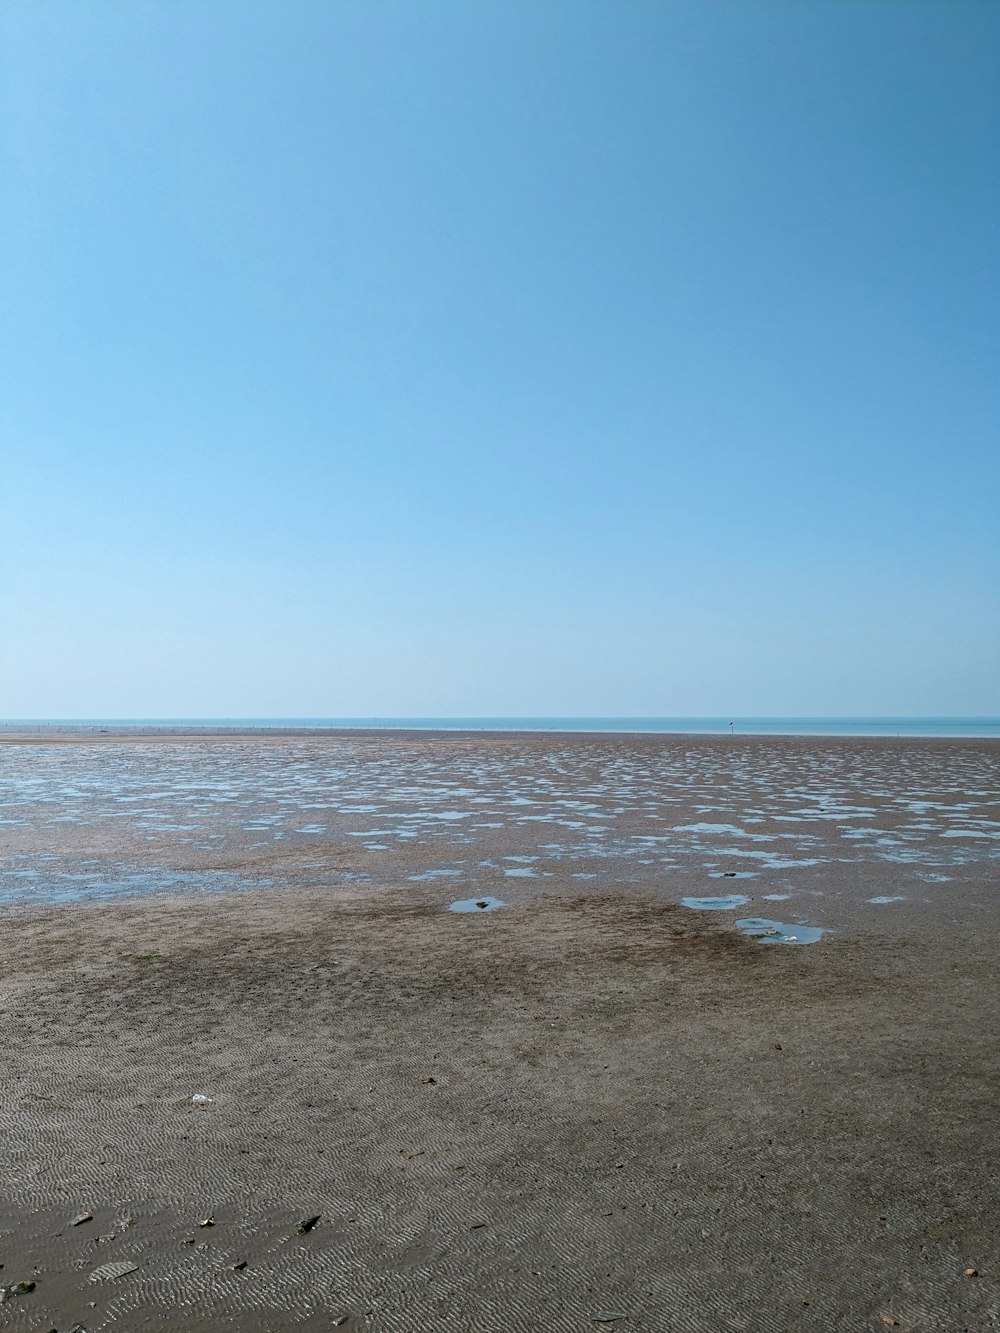 a view of a large body of water from a beach